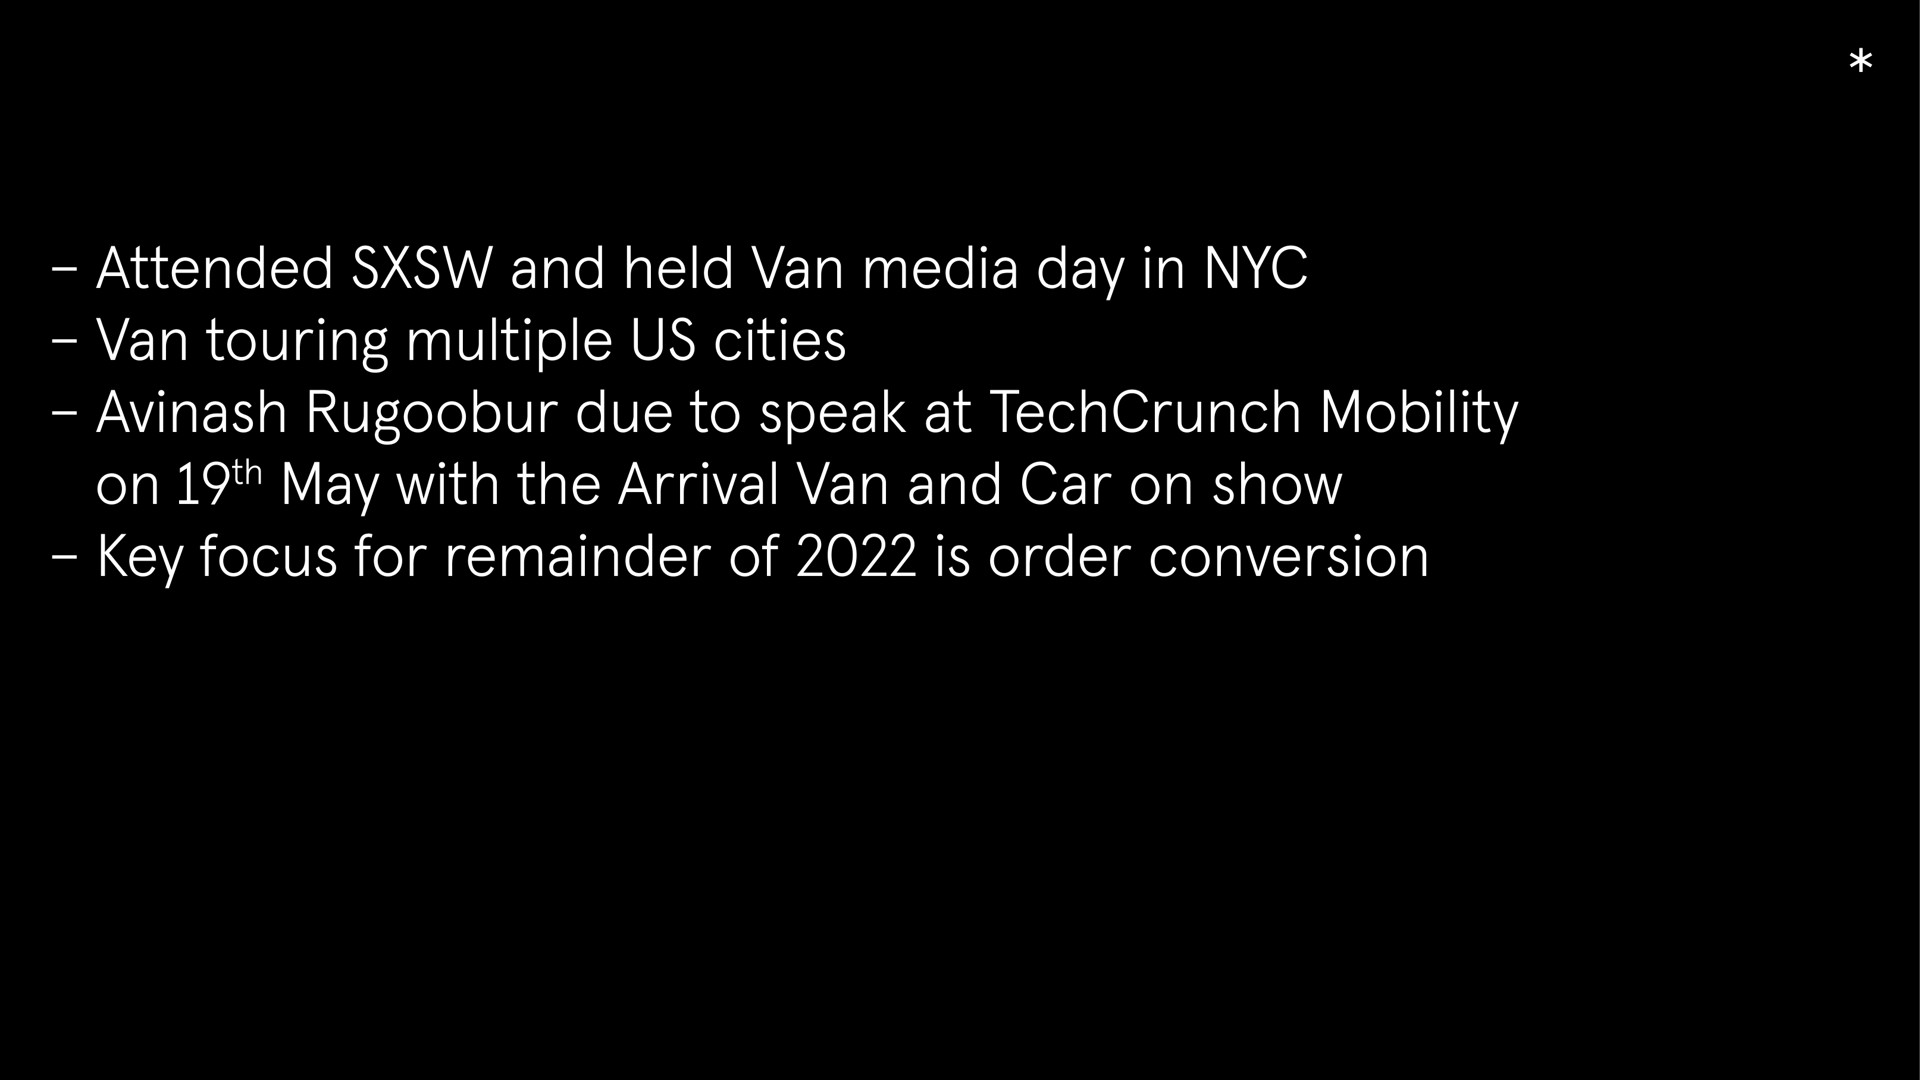 attended and held van media day in van touring multiple us cities due to speak at mobility on may with the arrival van and car on show key focus for remainder of is order conversion | Arrival